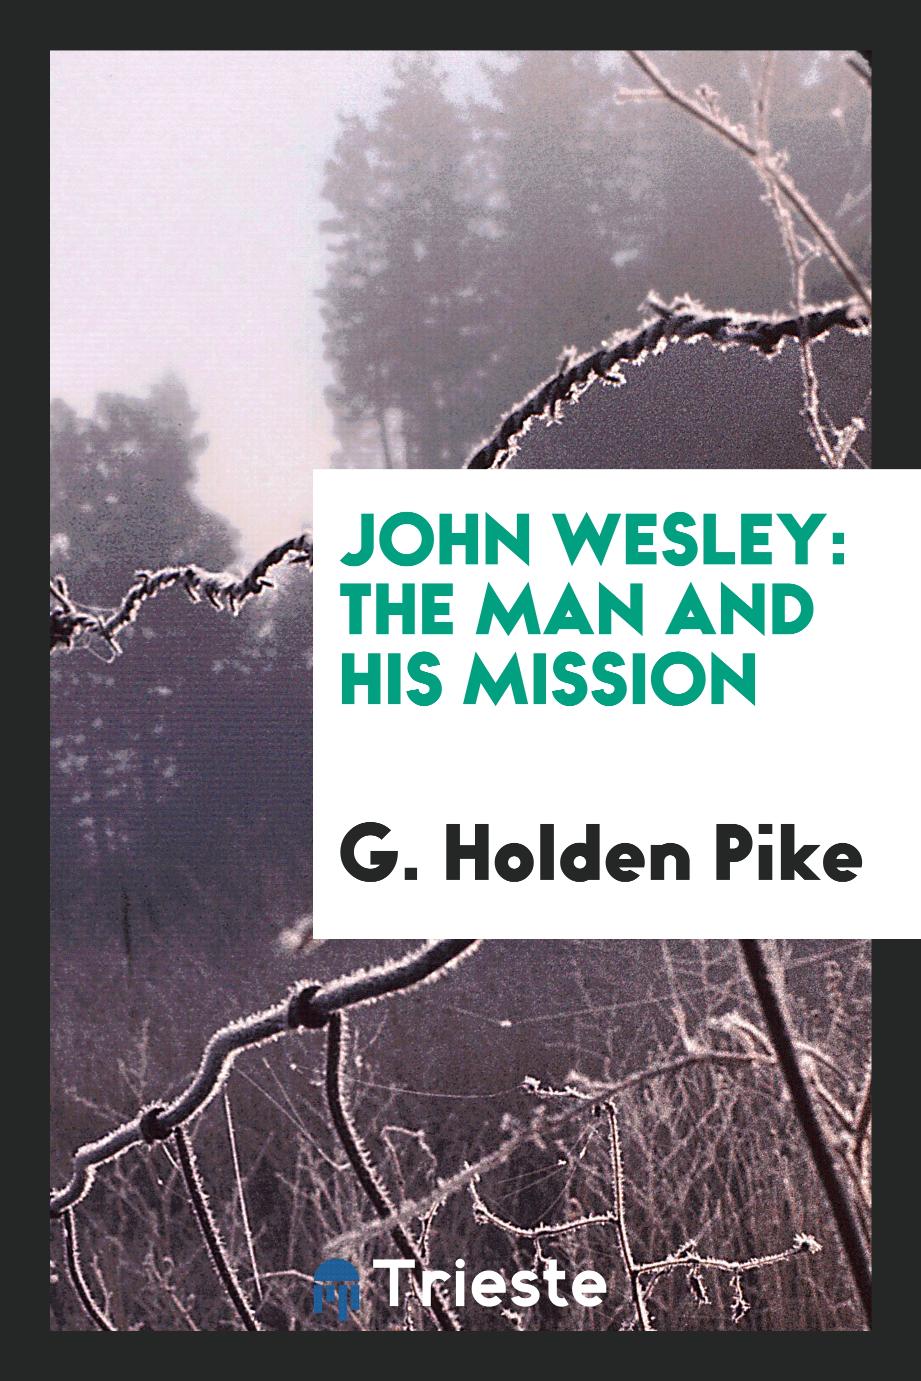 John Wesley: the man and his mission